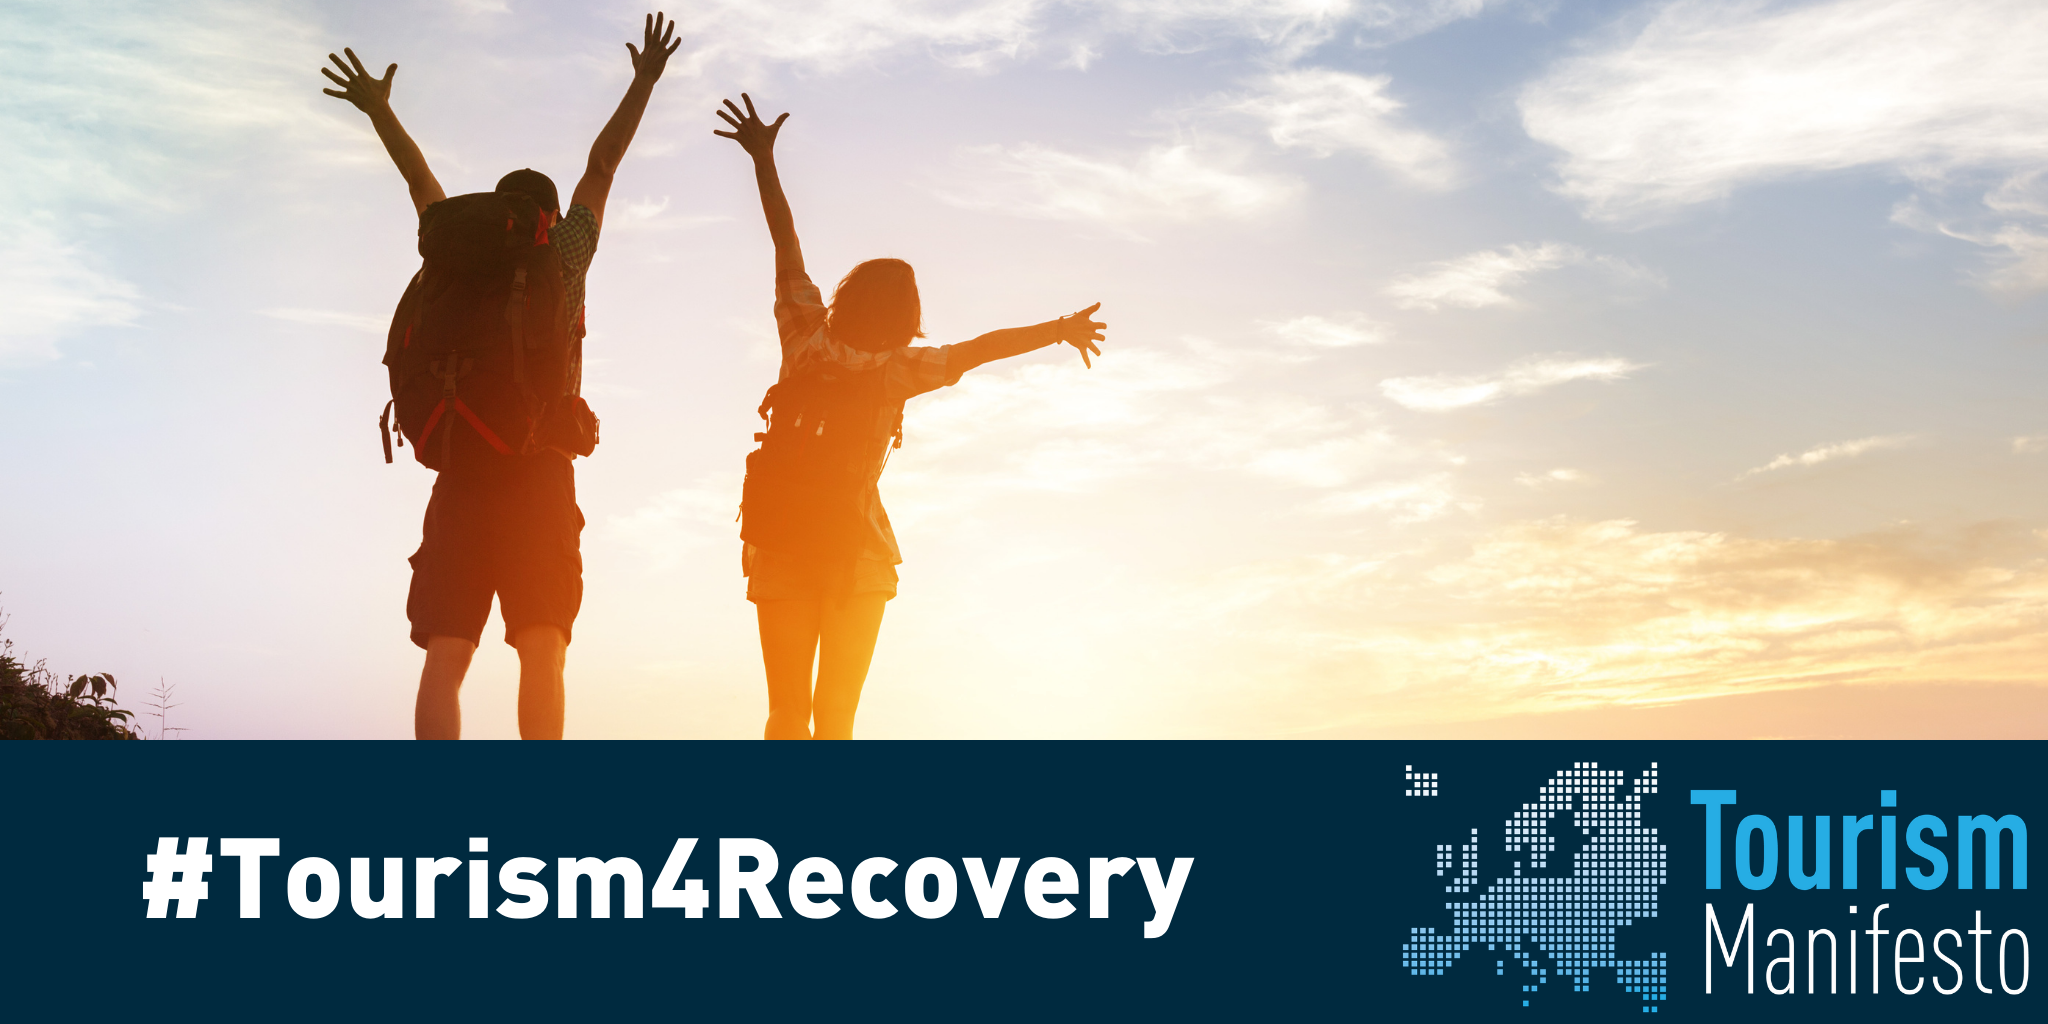 tourism4recovery banner image two people in silhoutte with raised arms facing sunlit sky 